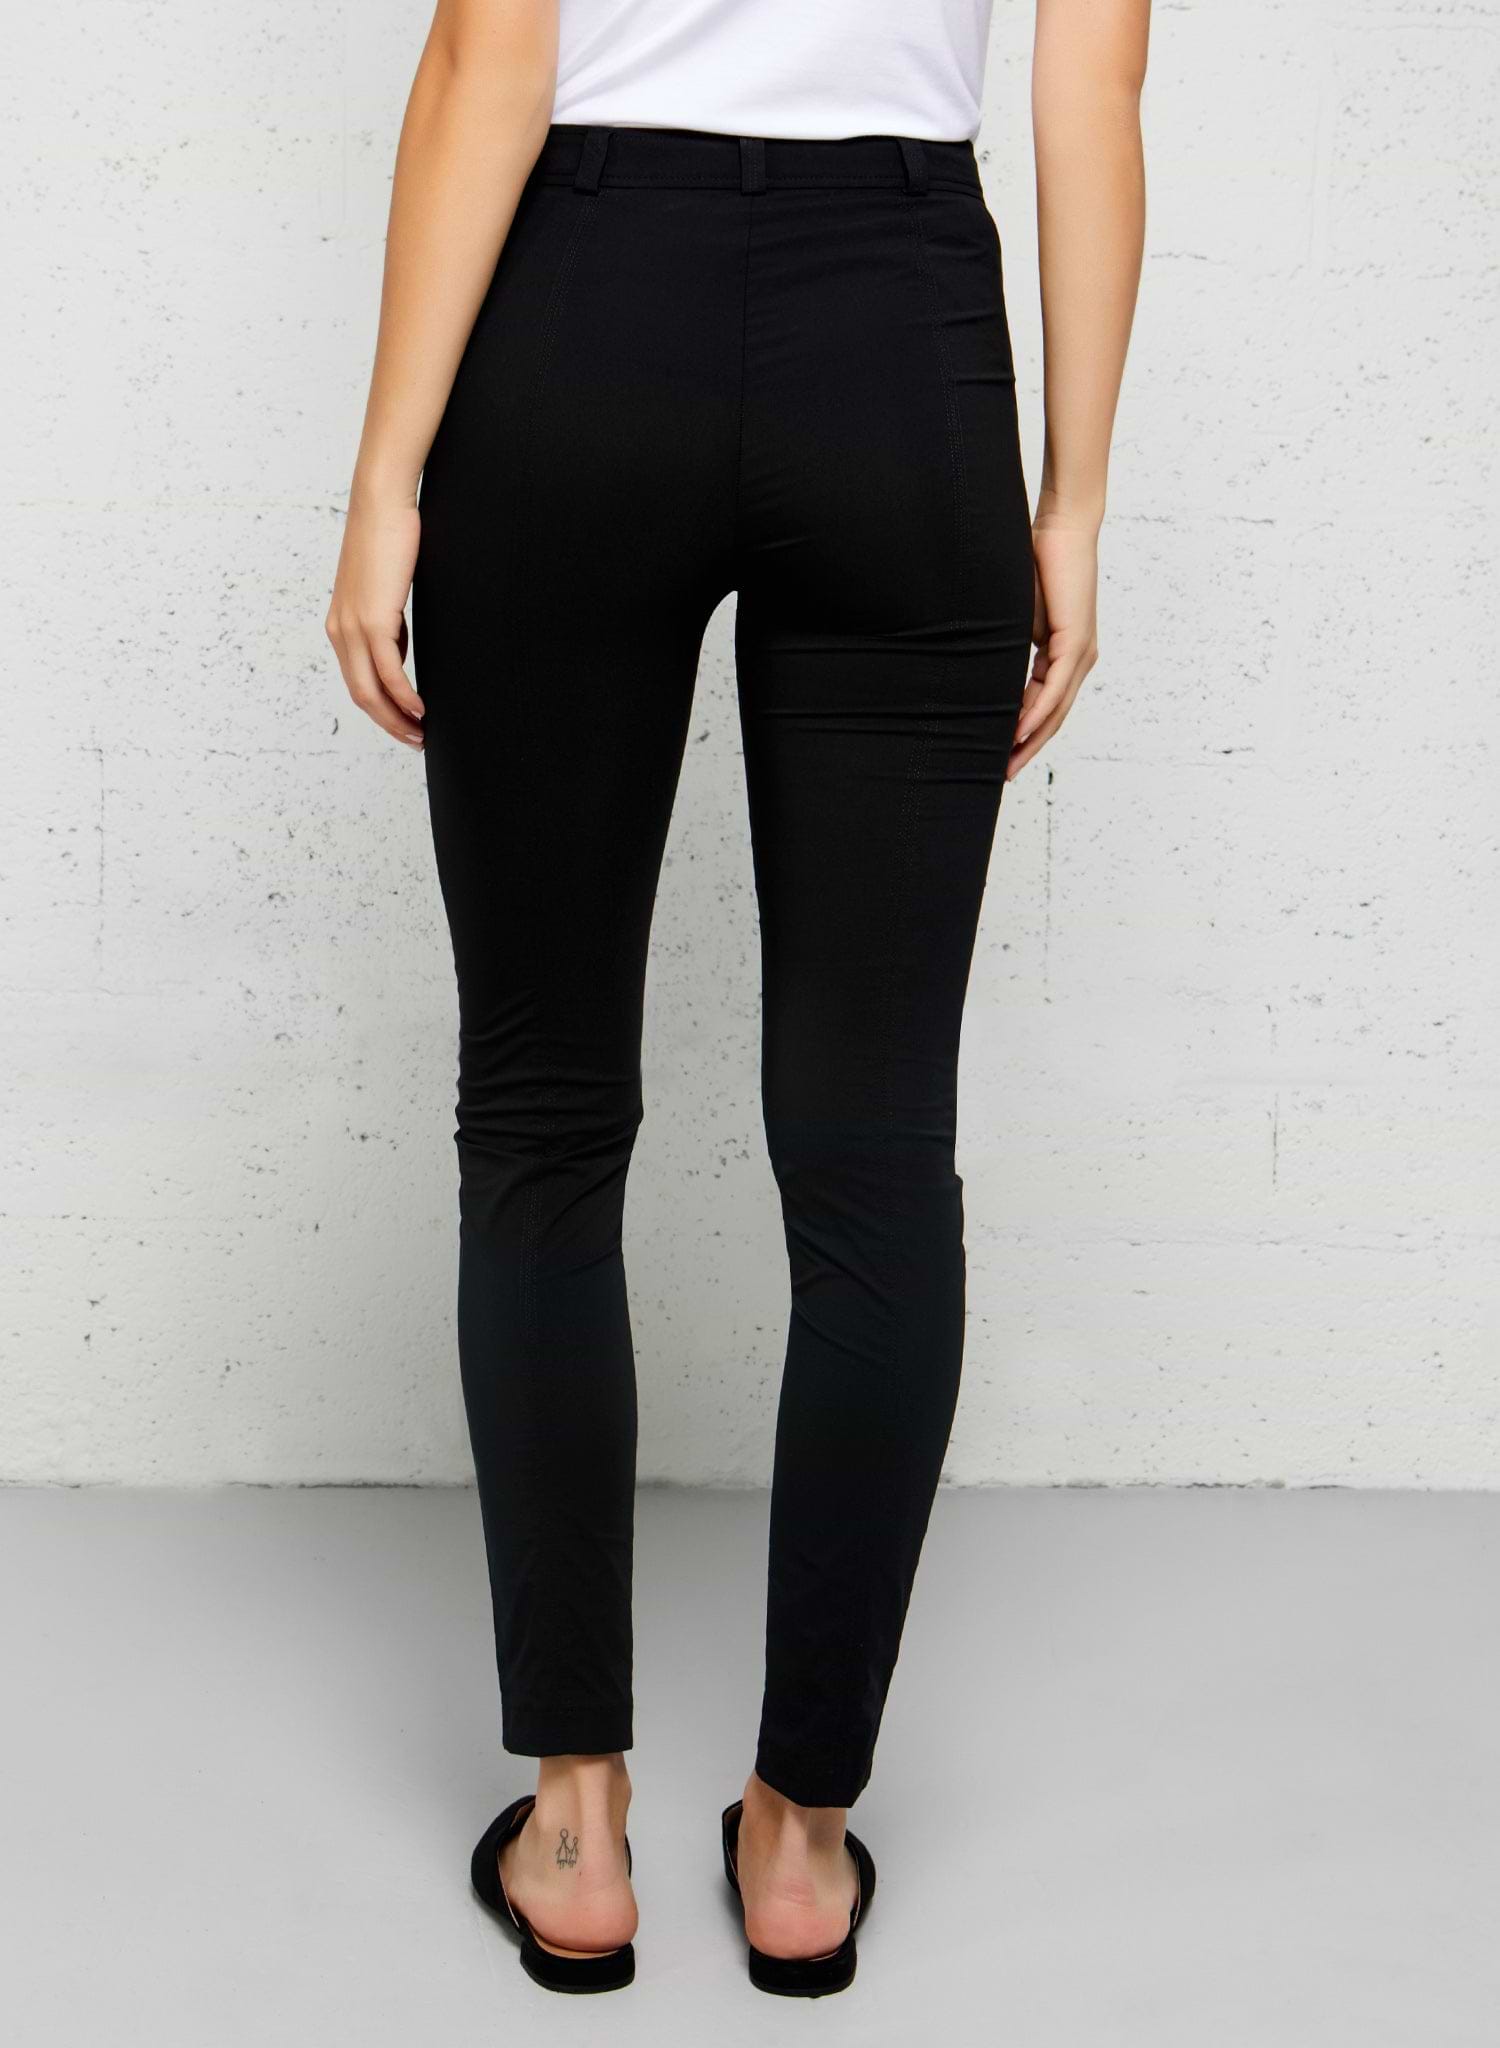 The Compass High Waist Pants In Black Curves • Impressions Online Boutique